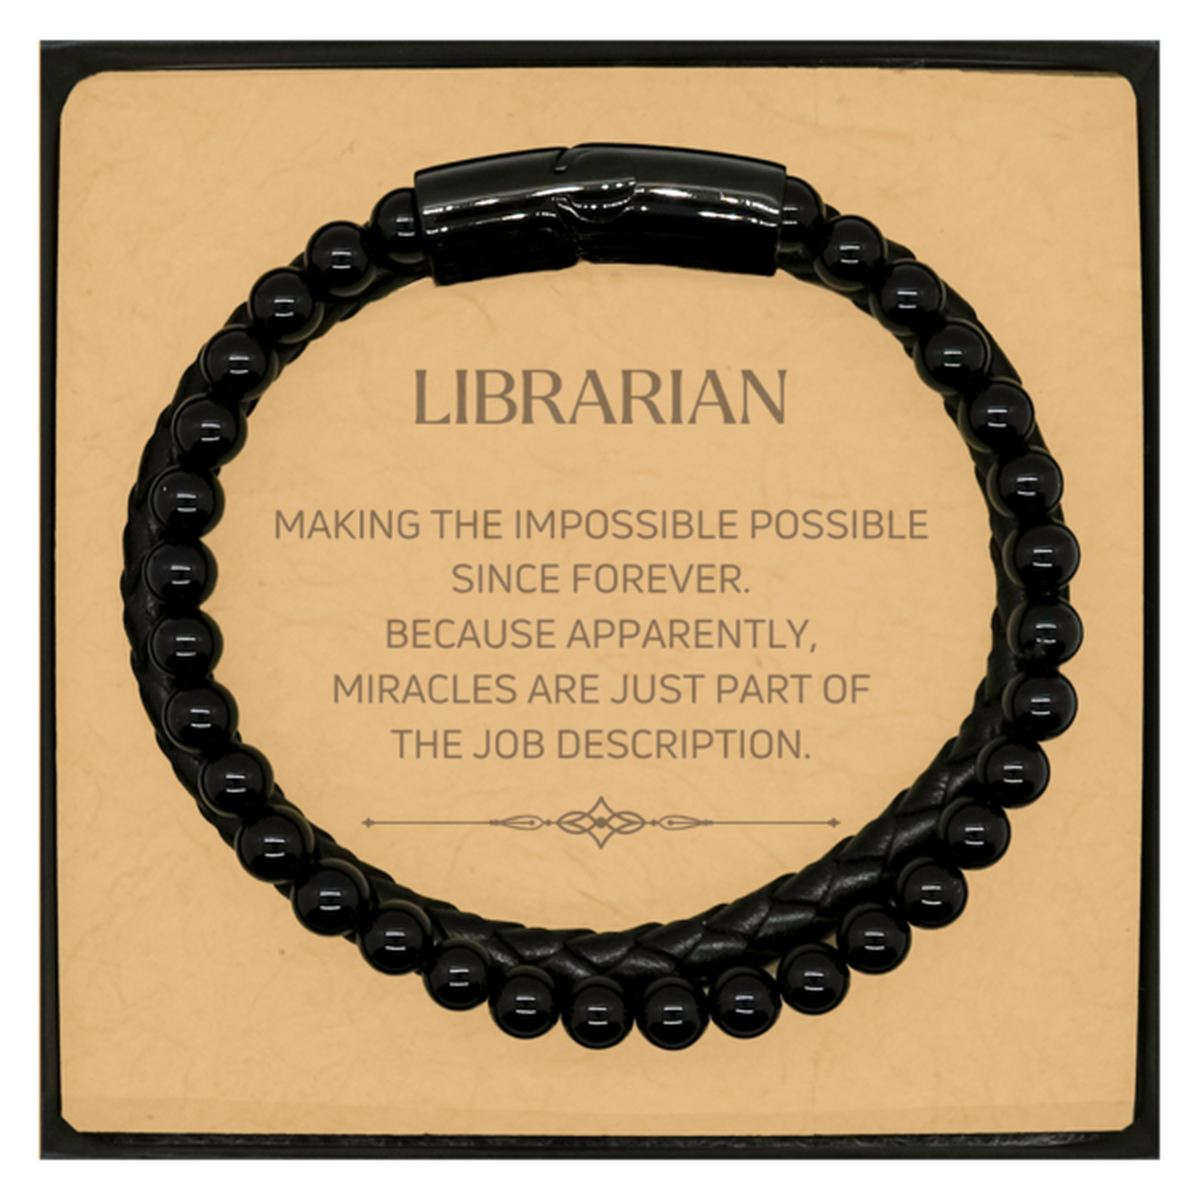 Funny Librarian Gifts, Miracles are just part of the job description, Inspirational Birthday Christmas Stone Leather Bracelets For Librarian, Men, Women, Coworkers, Friends, Boss